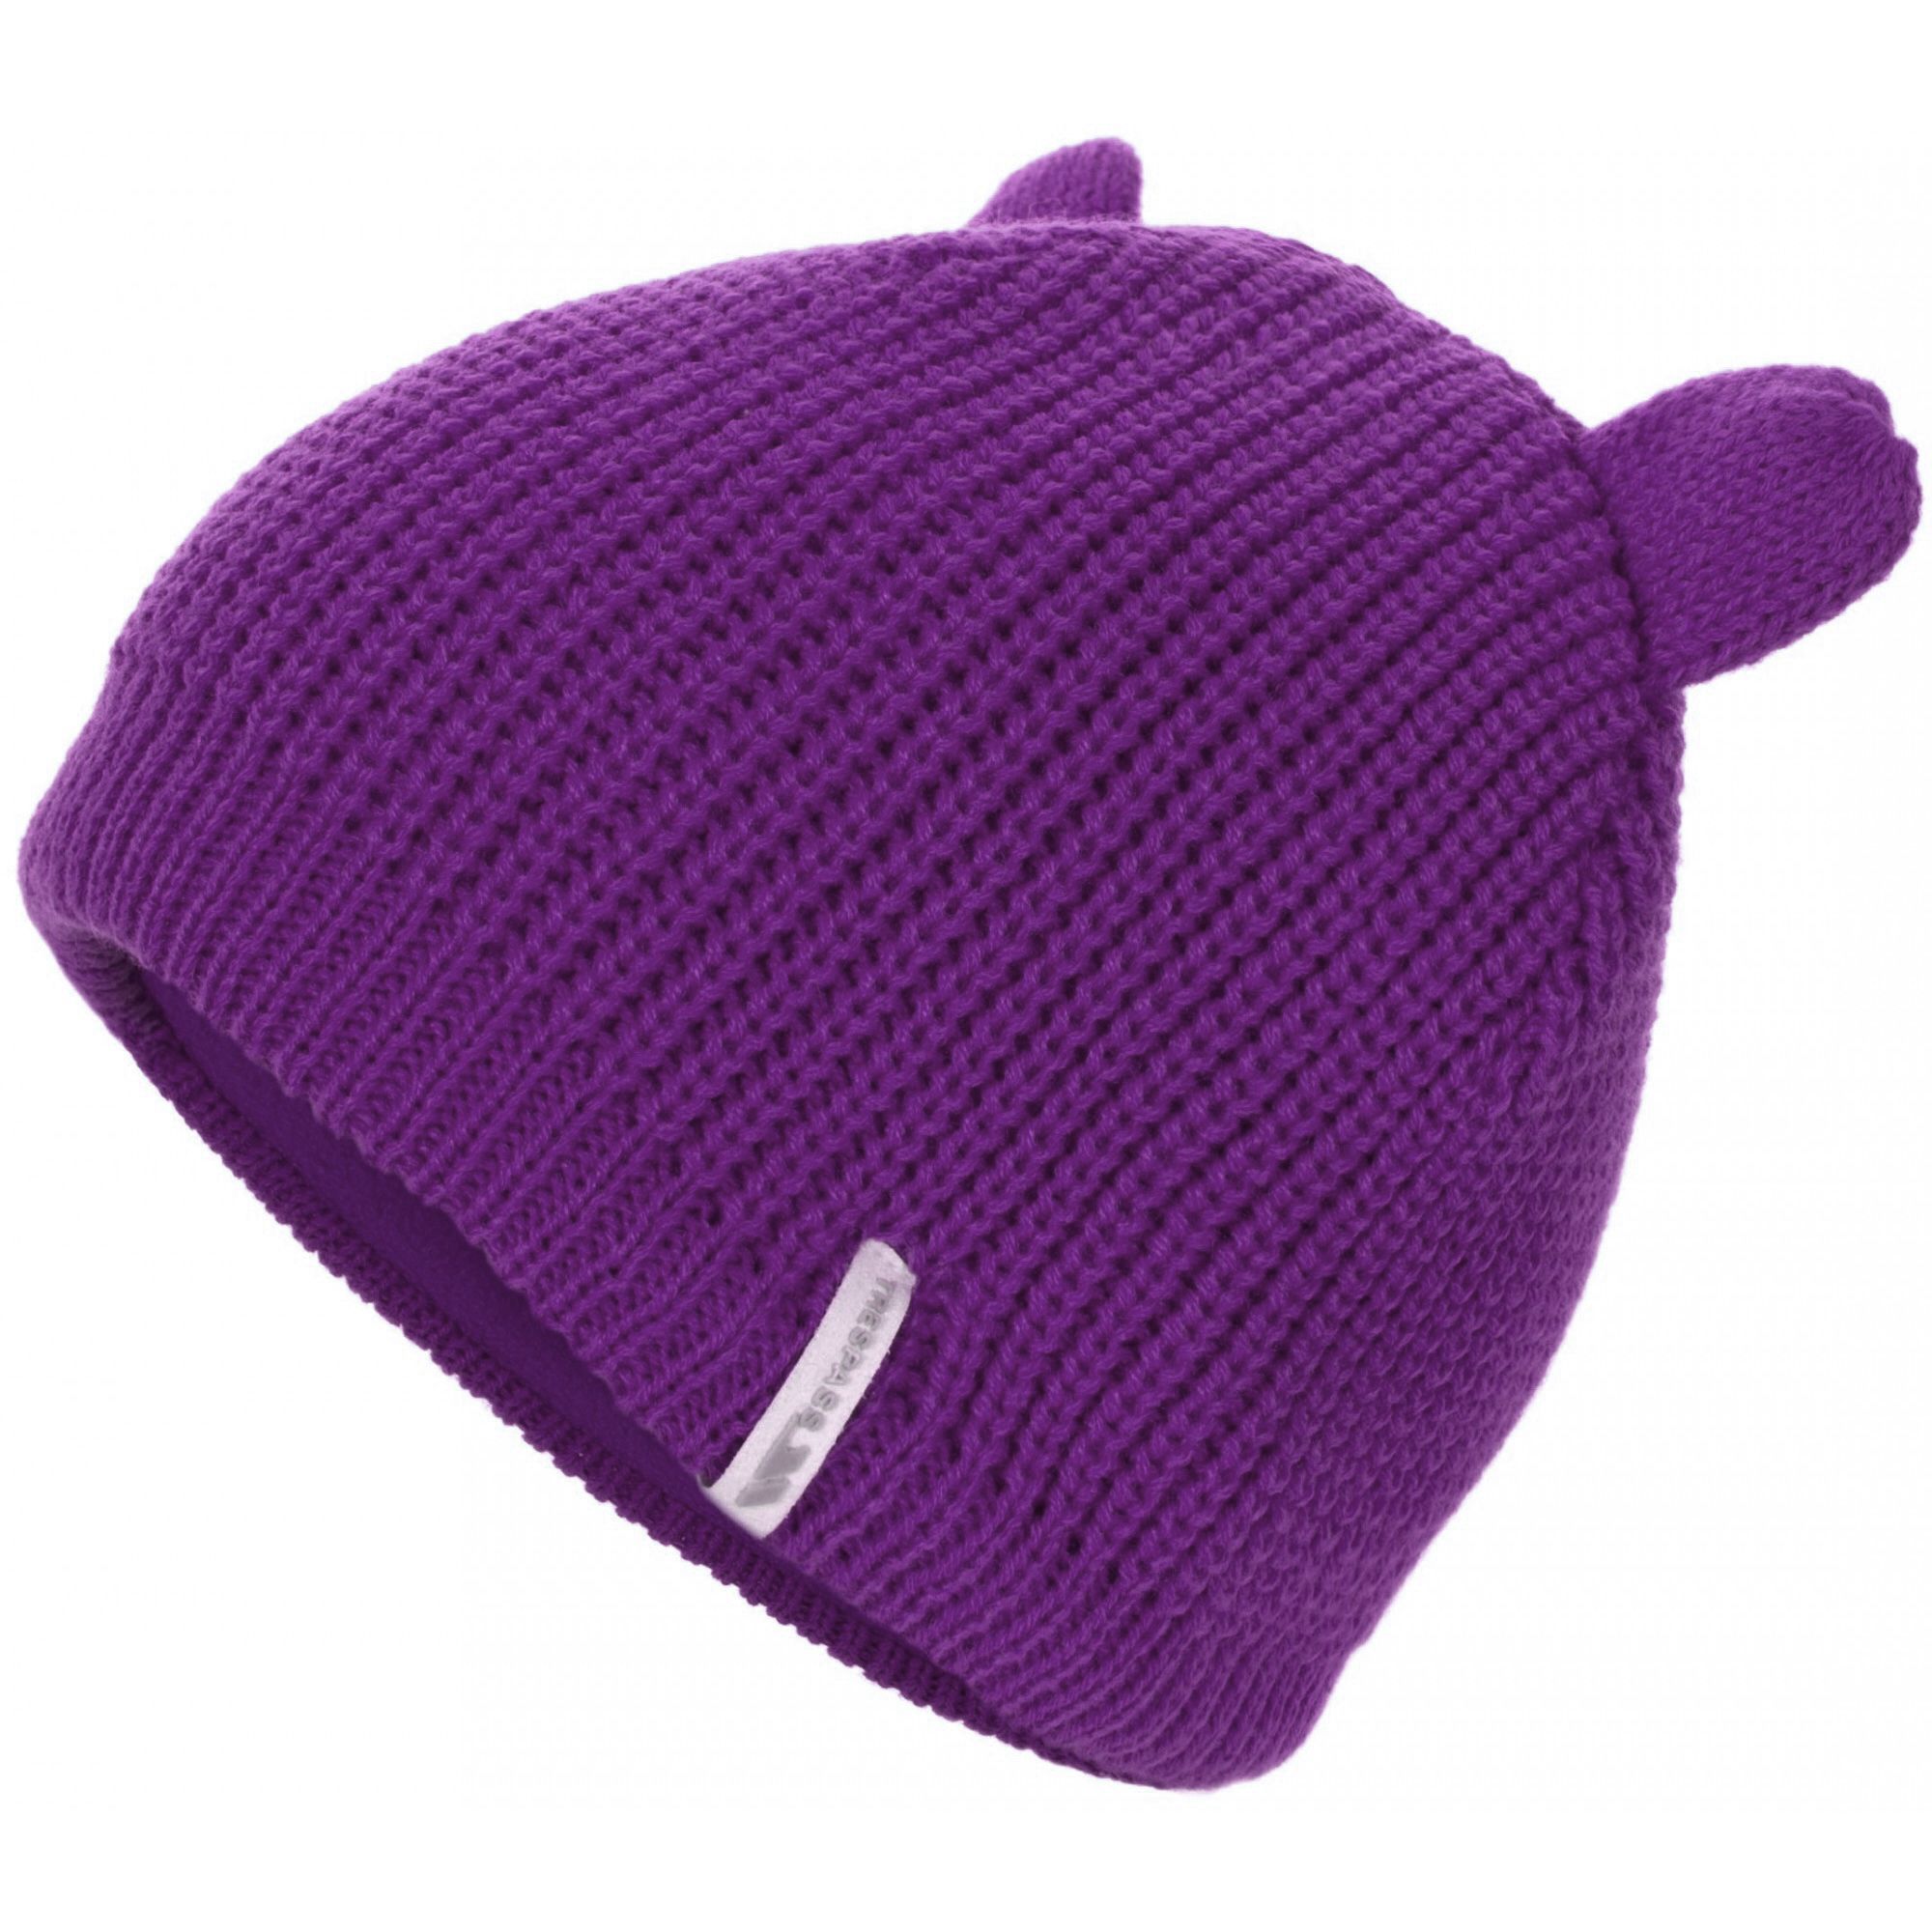 Knitted Beanie With Bear Ears. Fleece Lined. Woven Tab. Outer: 100% acrylic, Lining: 100% polyester fleece.